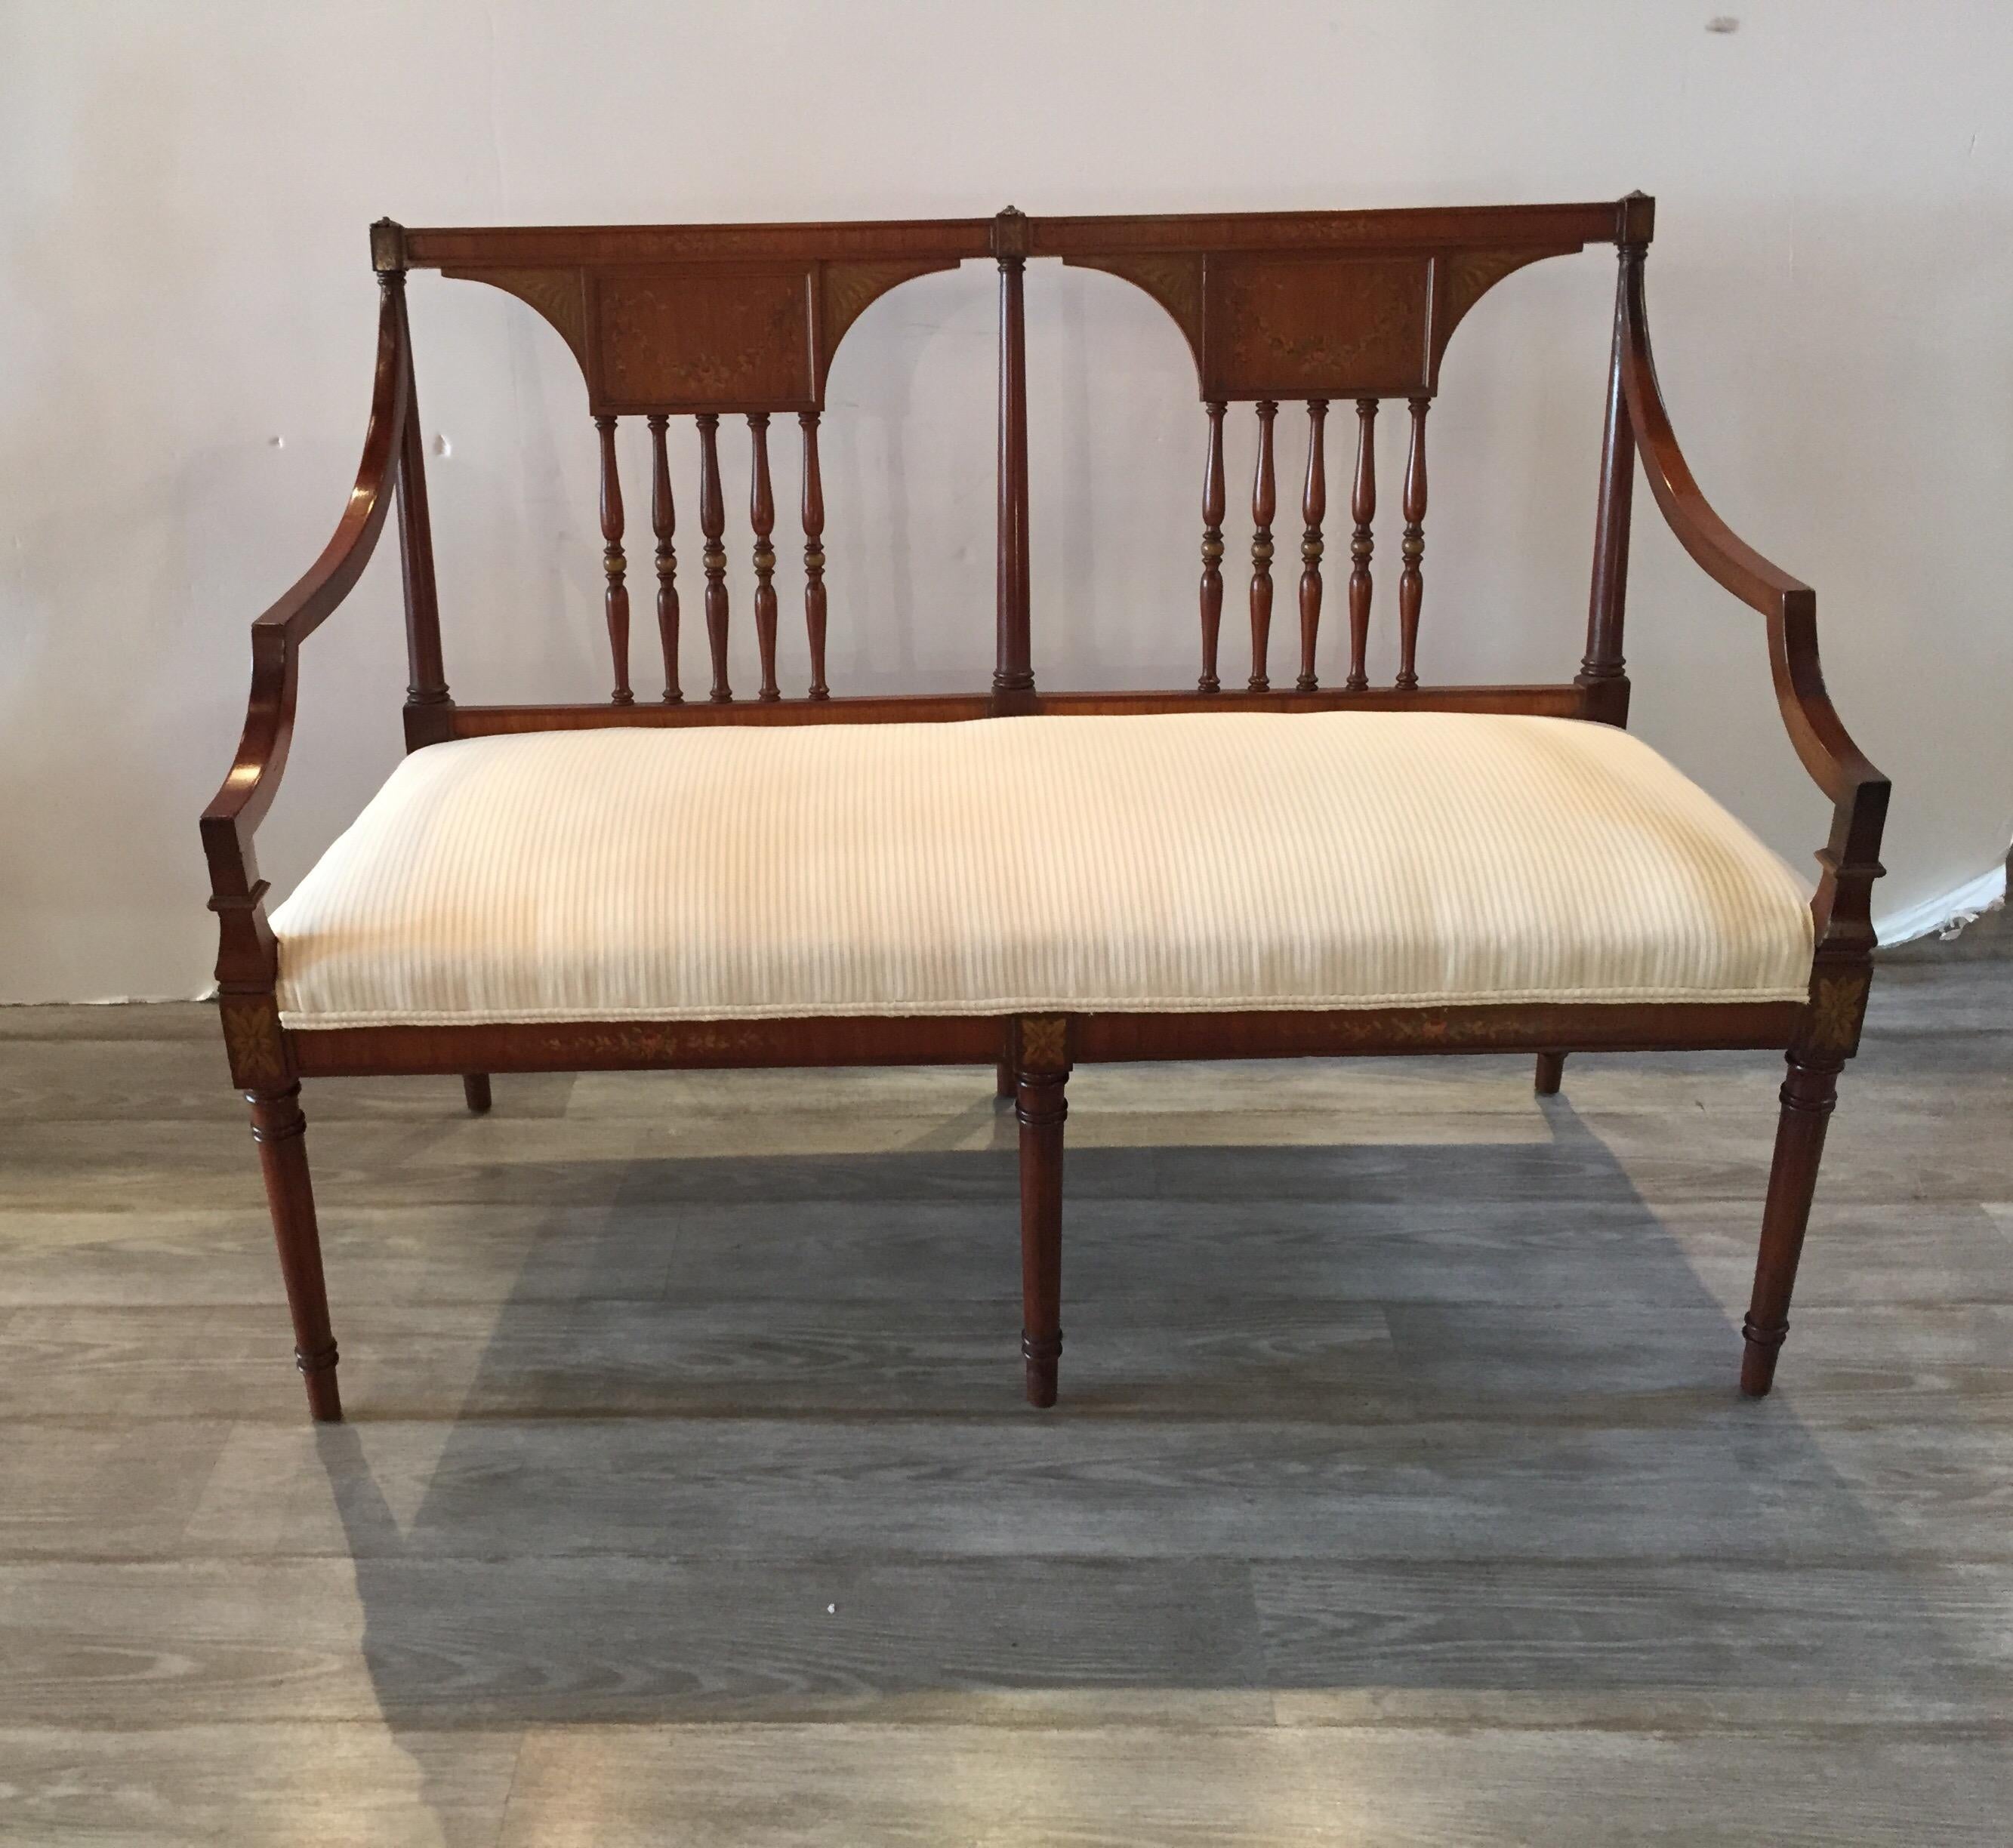 Elegant English Adam style satinwood hand painted settee with neutral oyster micro stripped upholstered seat. The simple lines with small carved details at the corners with hand painted details on the back and along the apron.